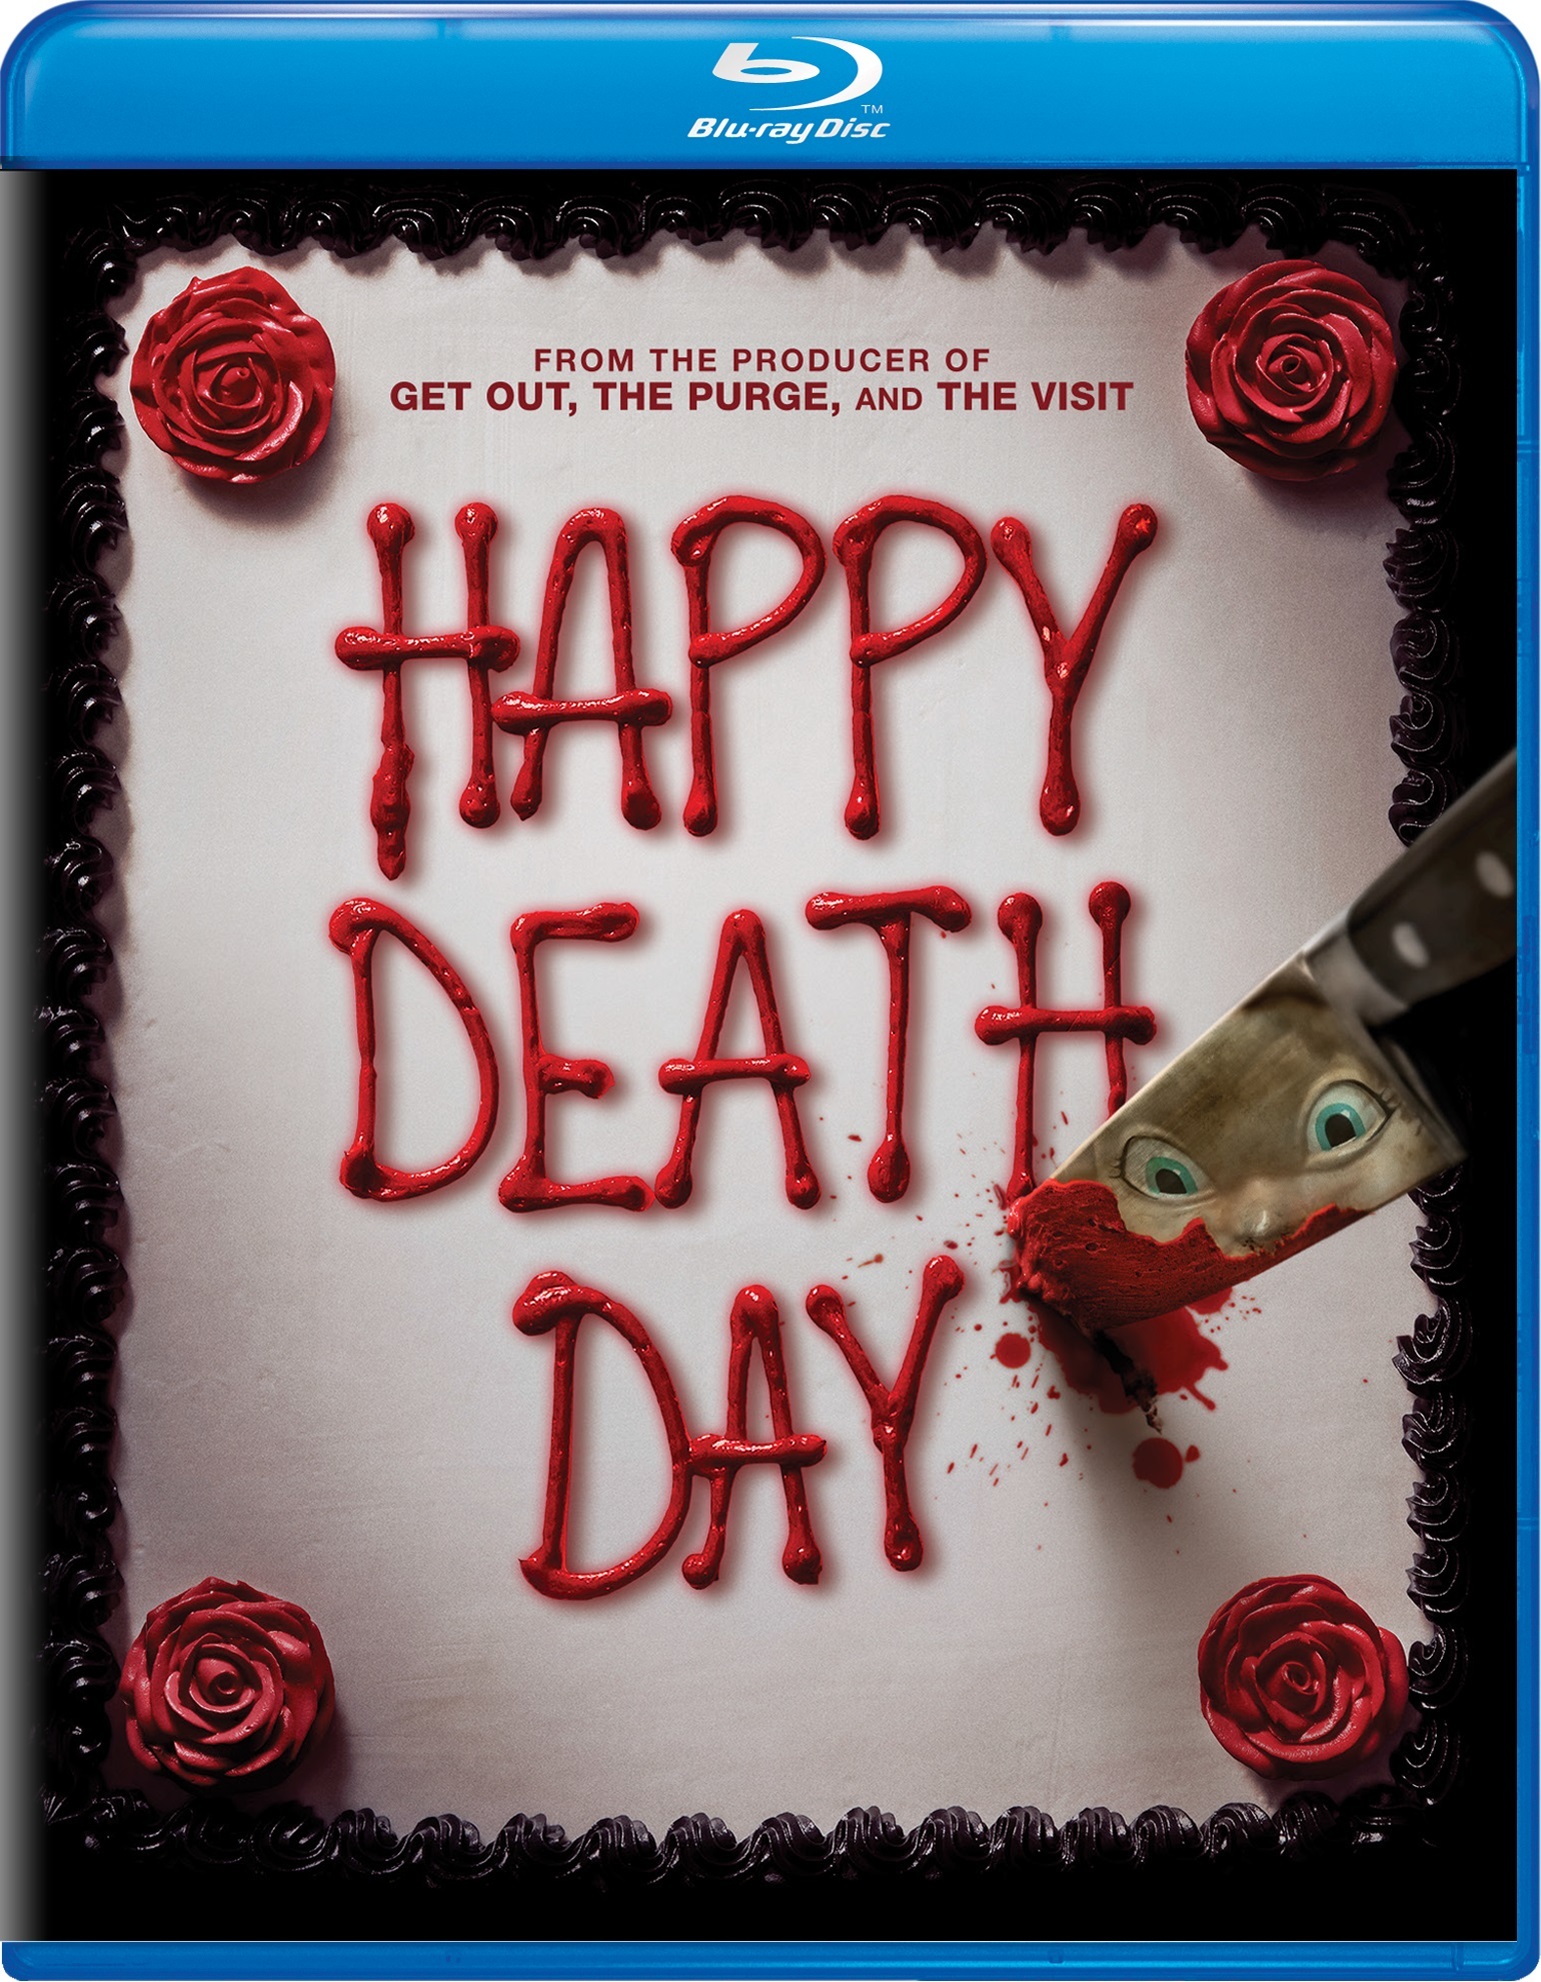 Happy Death Day - Blu-ray [ 2017 ]  - Horror Movies On Blu-ray - Movies On GRUV